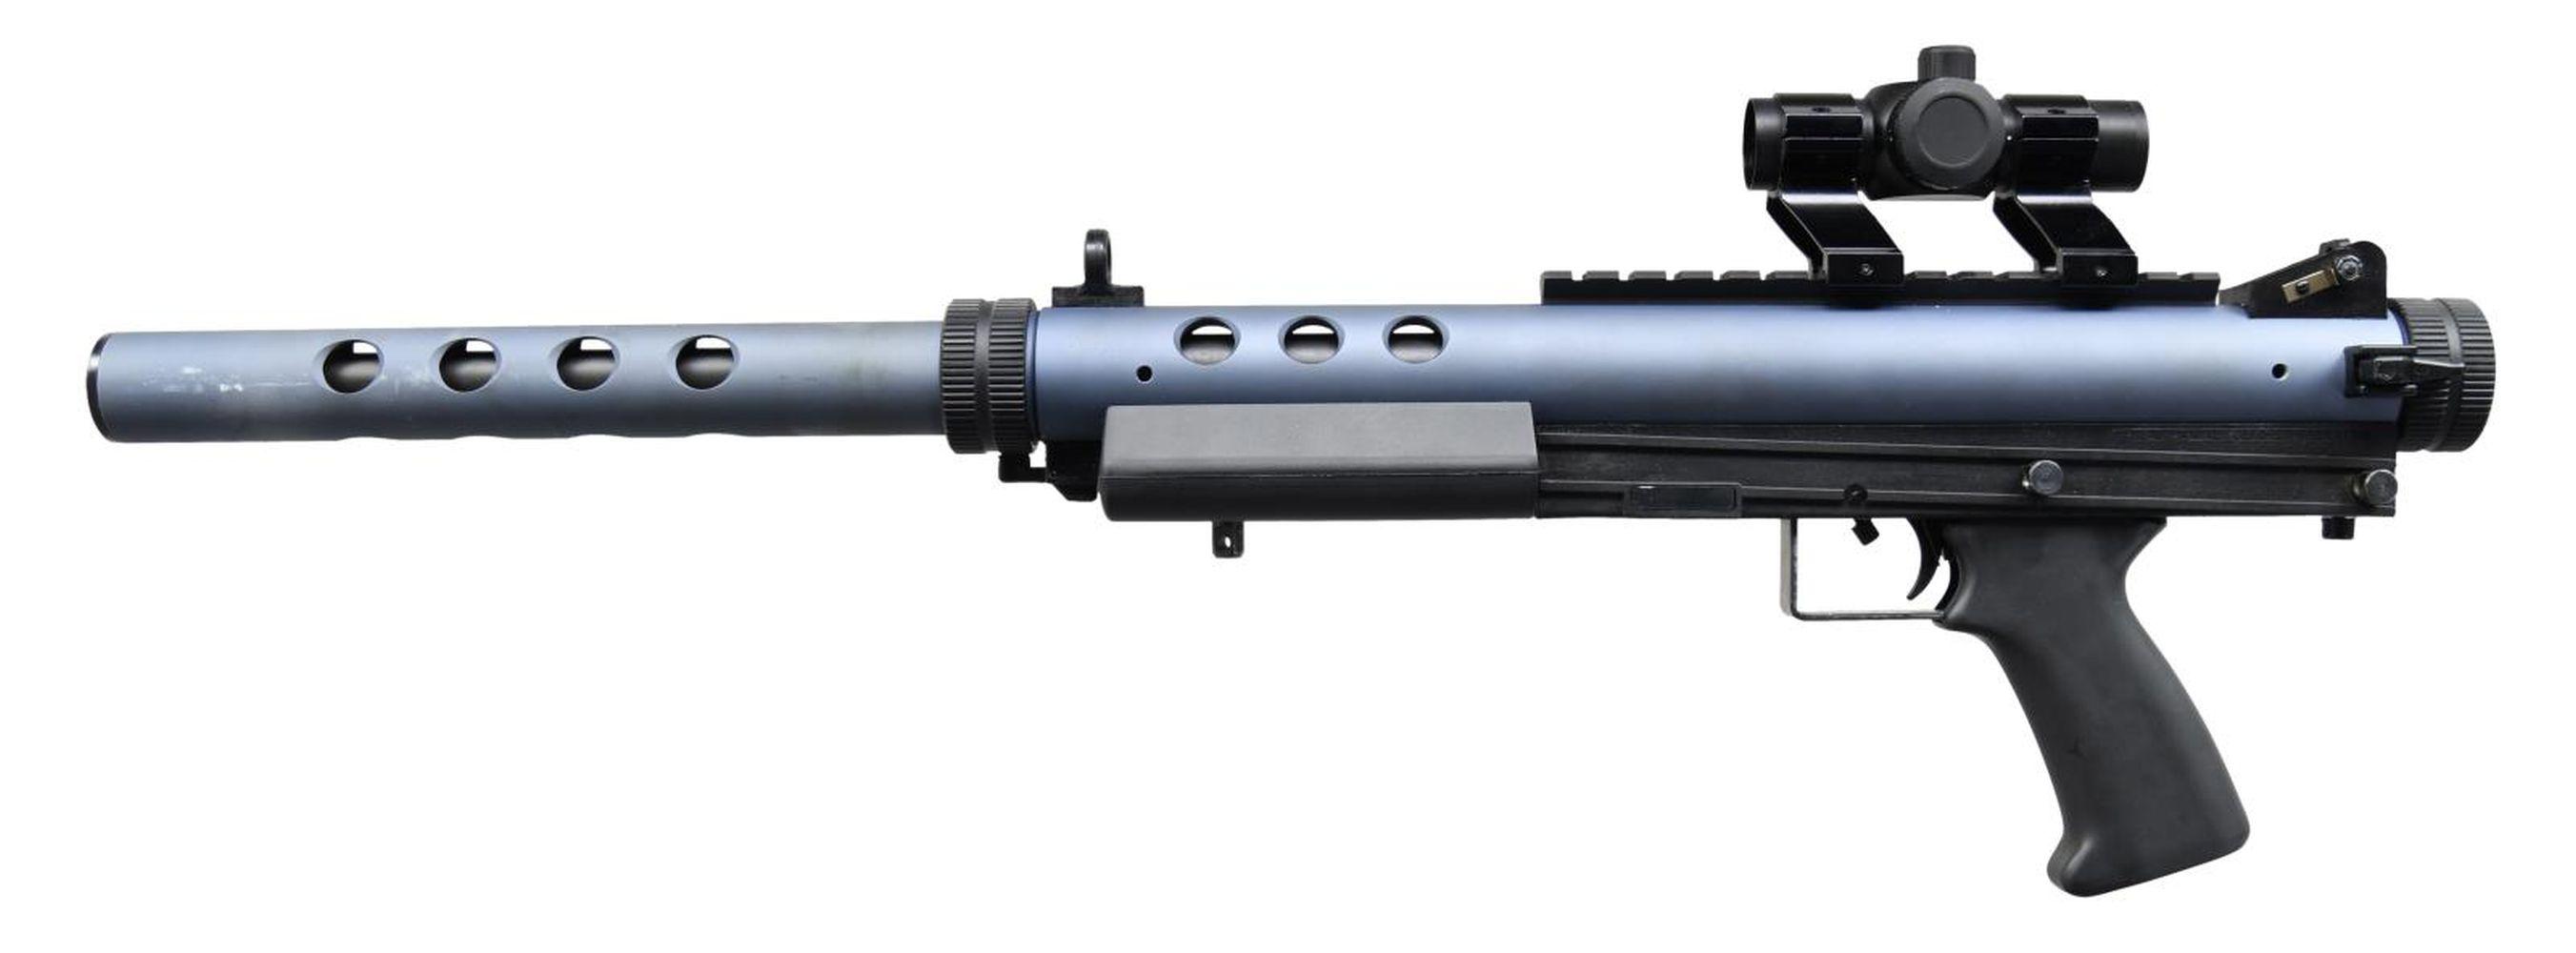 FEATHER INDUSTRIES AT-9 SEMI-AUTOMATIC RIFLE WITH